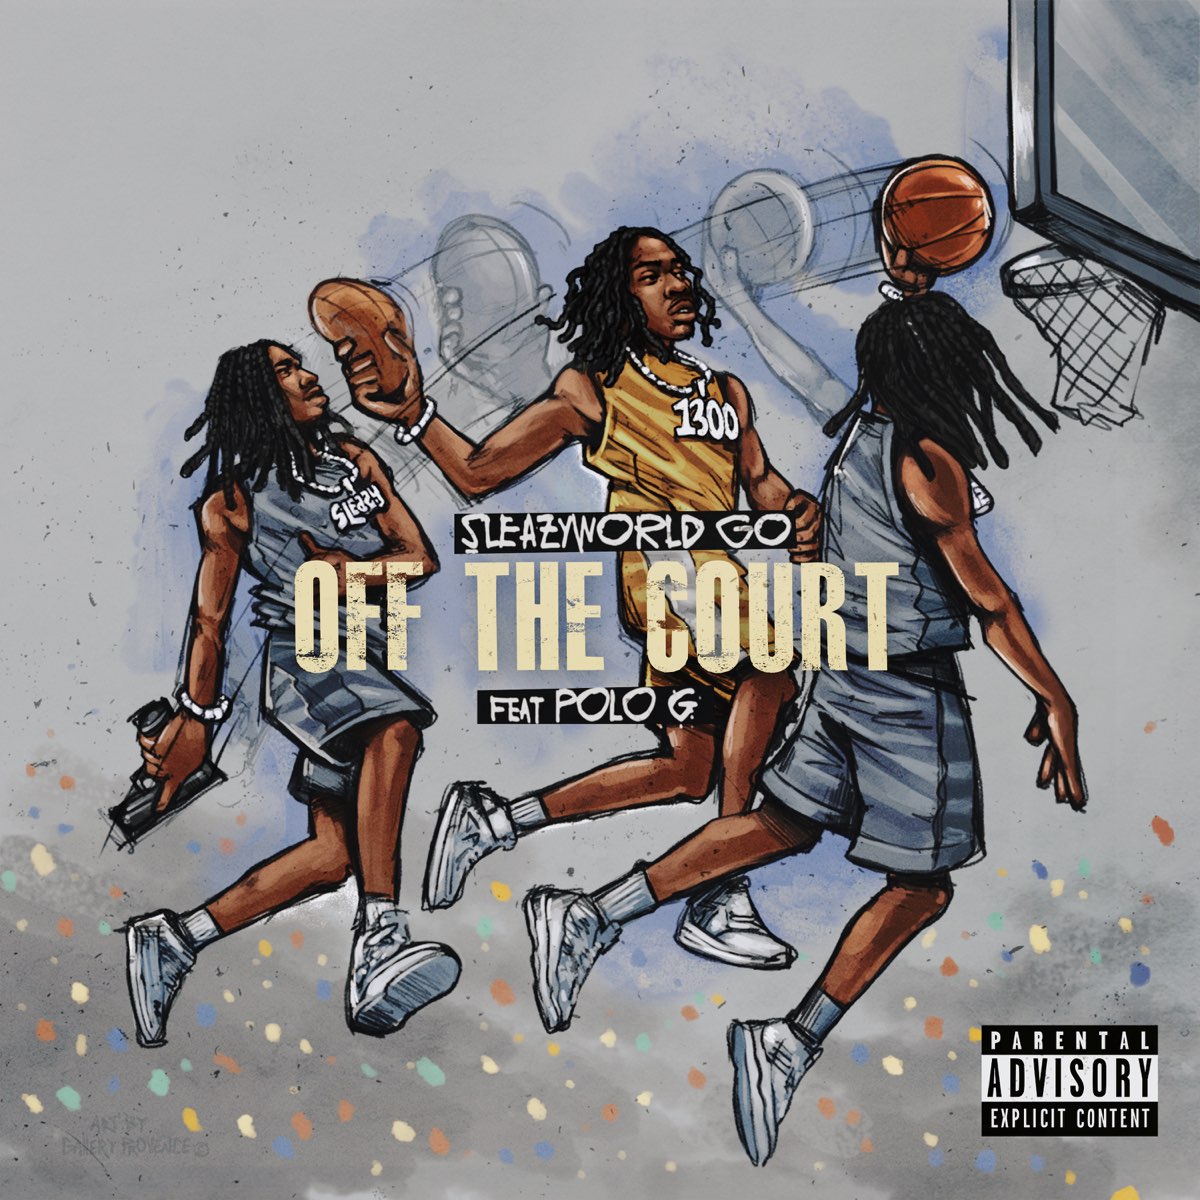 ‎Off The Court (feat Polo G Einer Bankz) Single Album by